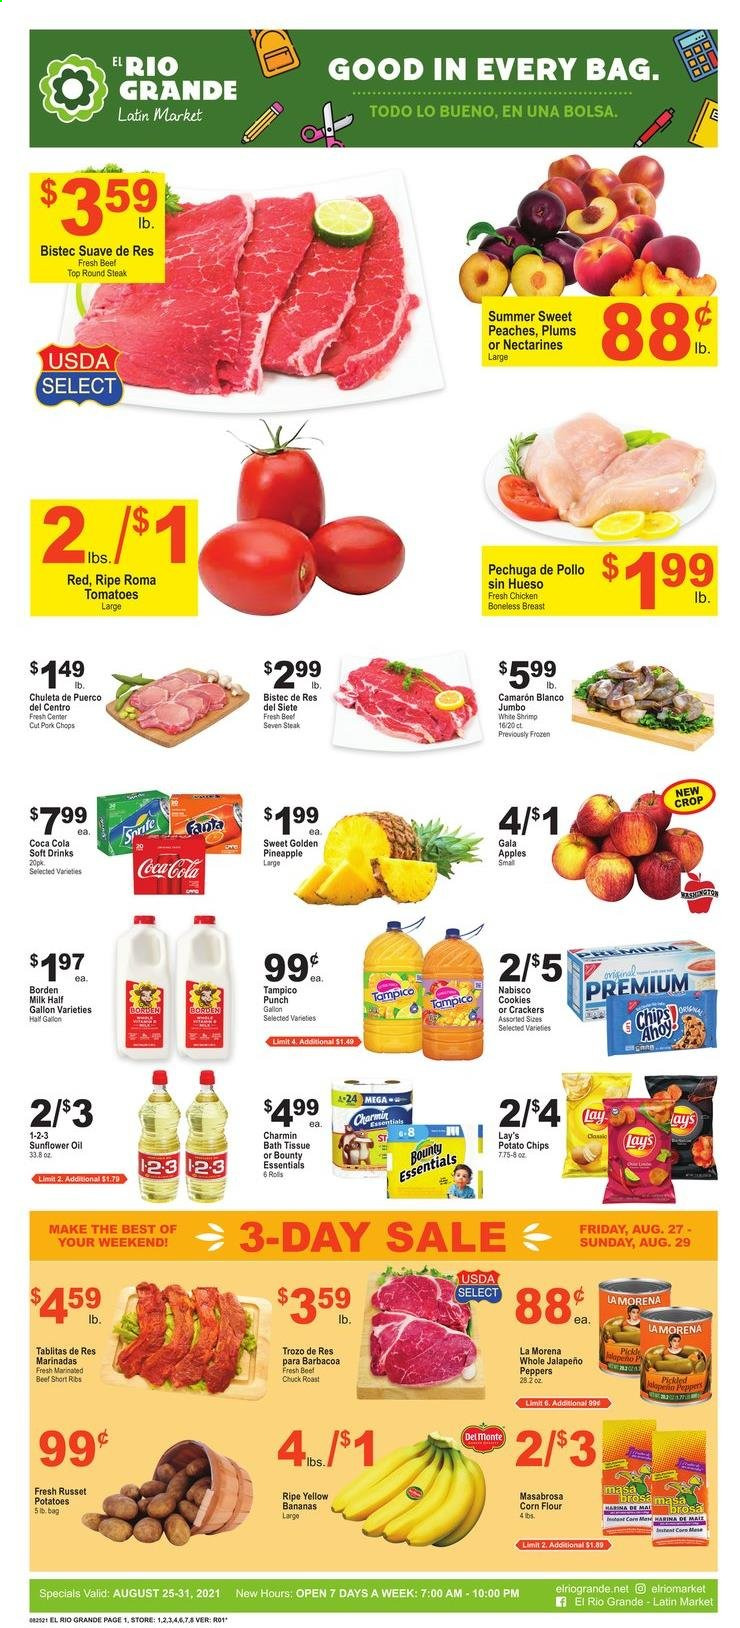 thumbnail - El Rio Grande Flyer - 08/25/2021 - 08/31/2021 - Sales products - plums, corn, russet potatoes, tomatoes, potatoes, peppers, jalapeño, apples, Gala, pineapple, shrimps, milk, cookies, Bounty, crackers, Lay’s, flour, corn flour, sunflower oil, oil, Coca-Cola, Fanta, soft drink, fruit punch, beef meat, beef ribs, steak, round steak, chuck roast, marinated beef, pork chops, pork meat, nectarines, peaches. Page 1.